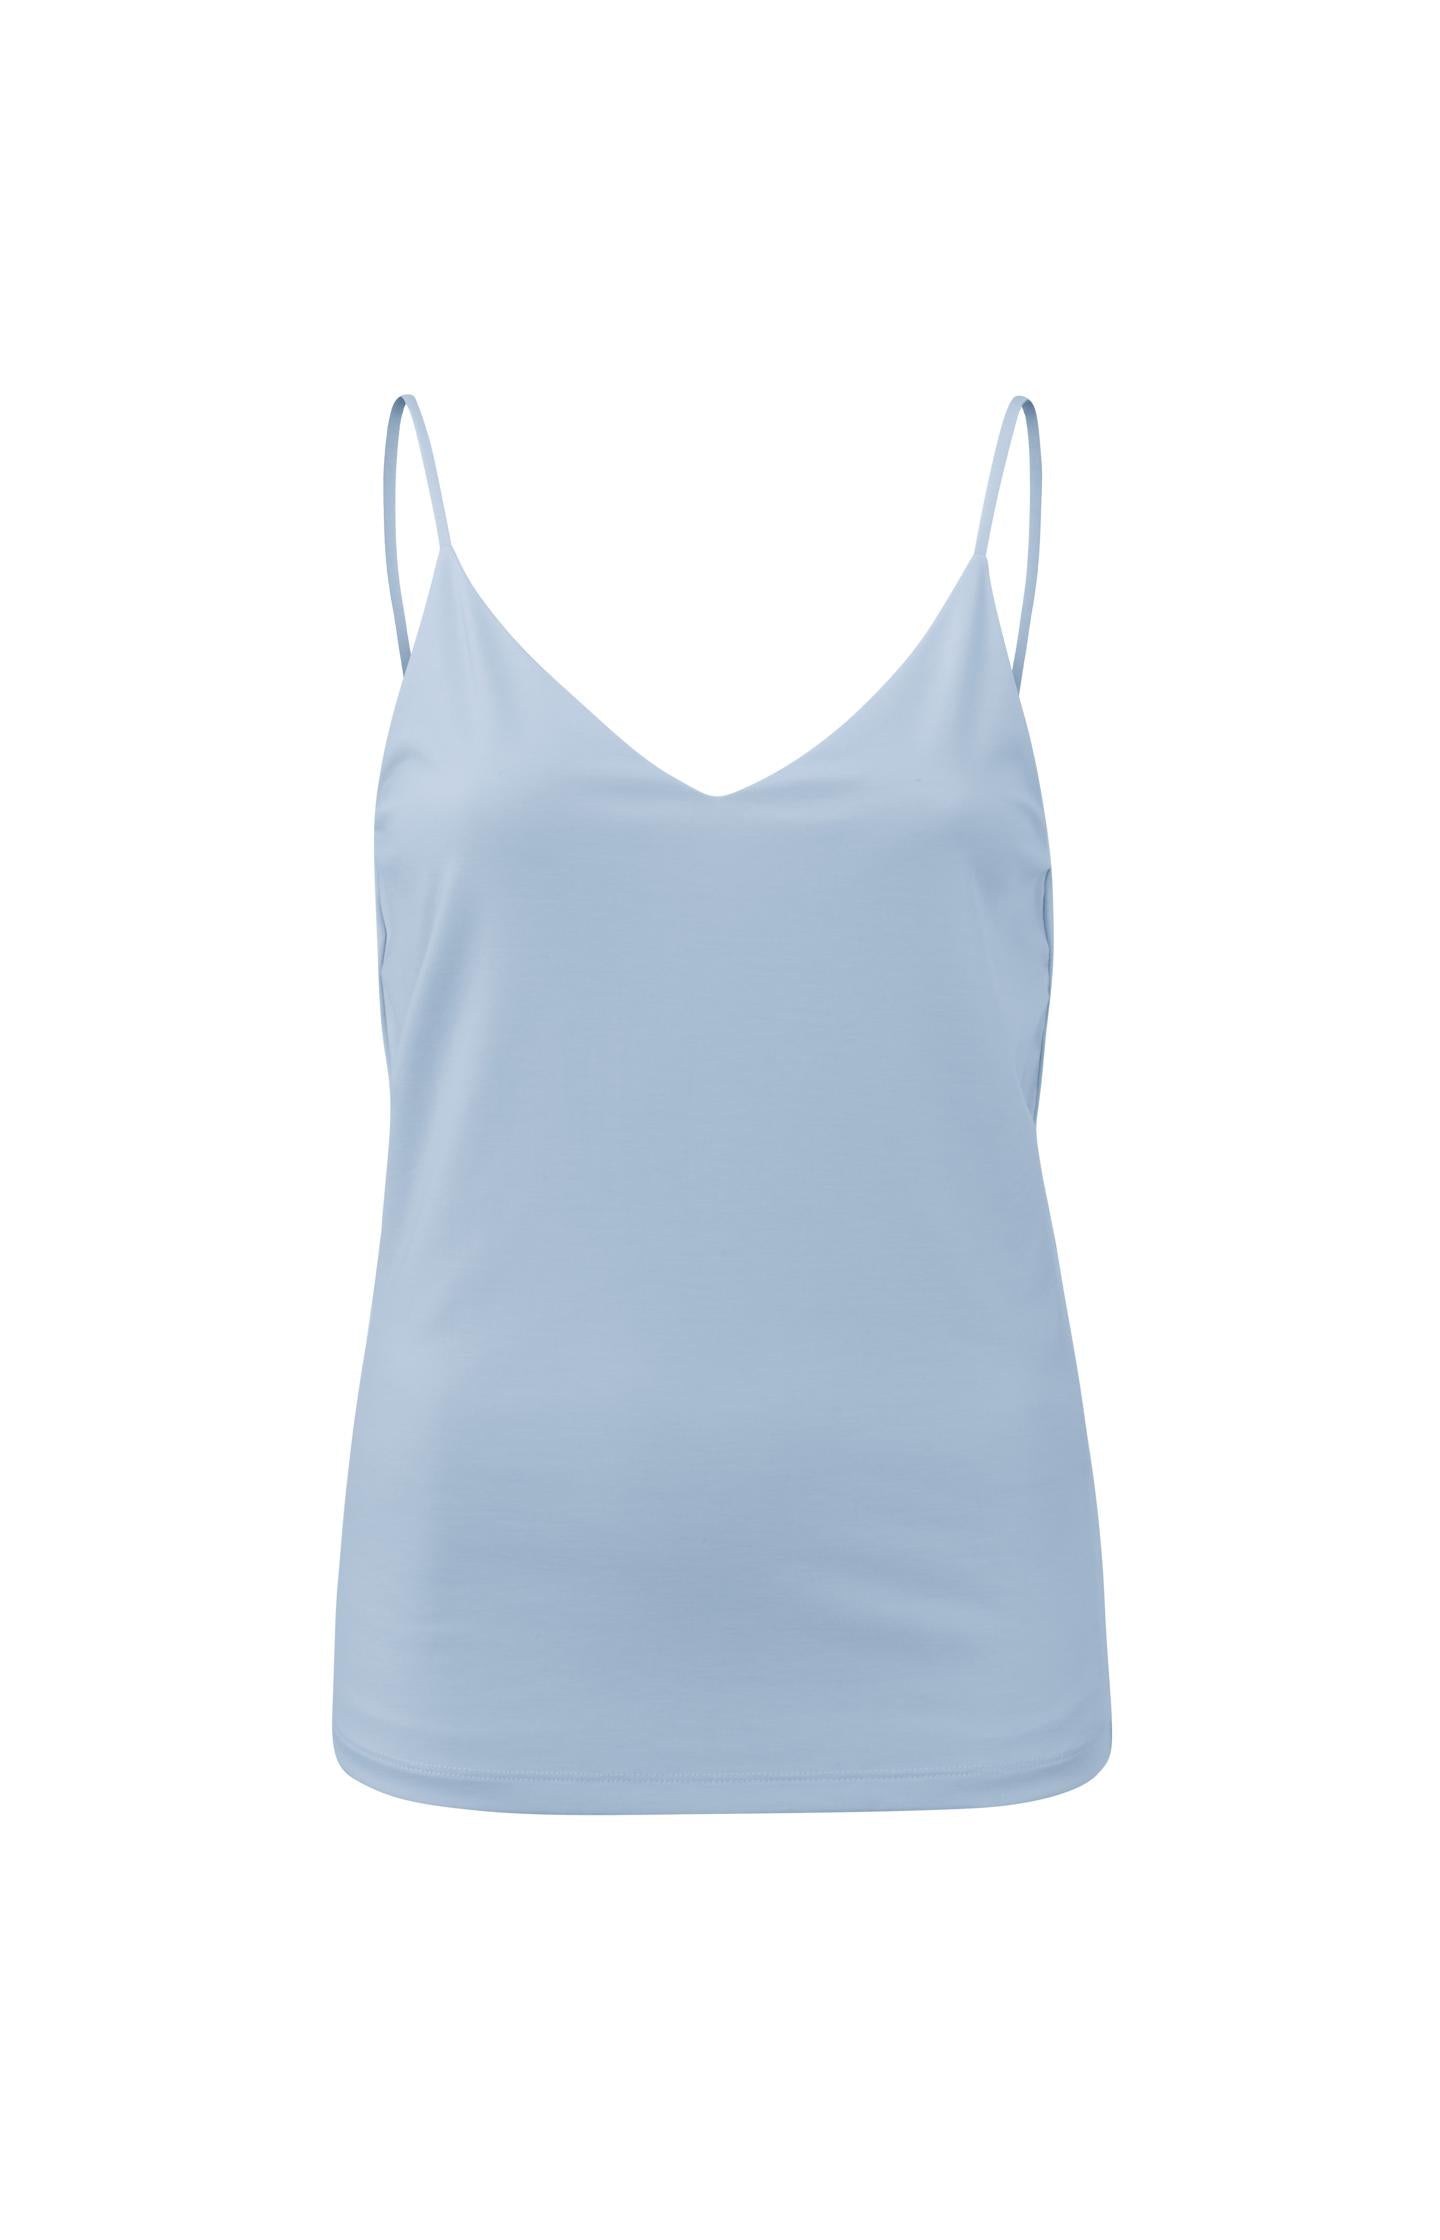 Jersey cami top with a V-neck and spaghetti straps - Type: product